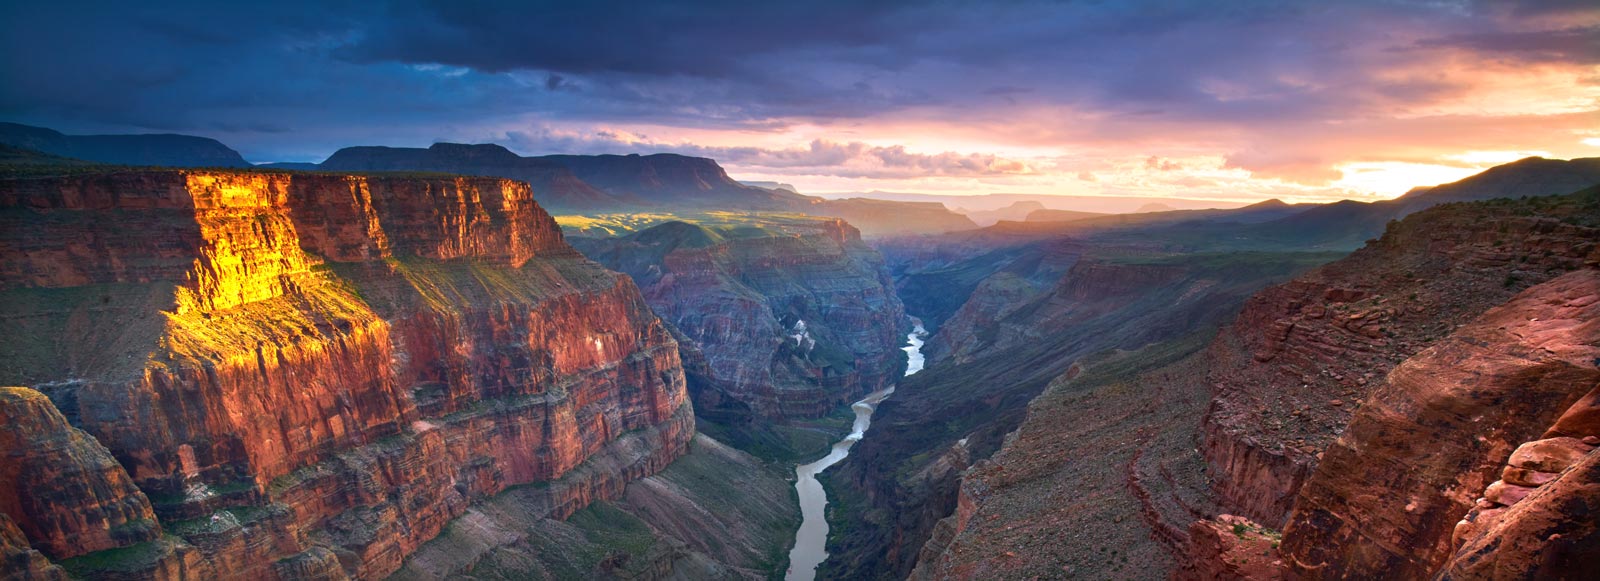 Colorado River Panoramic - Landscape and National Park Photography by Daniel Ewert